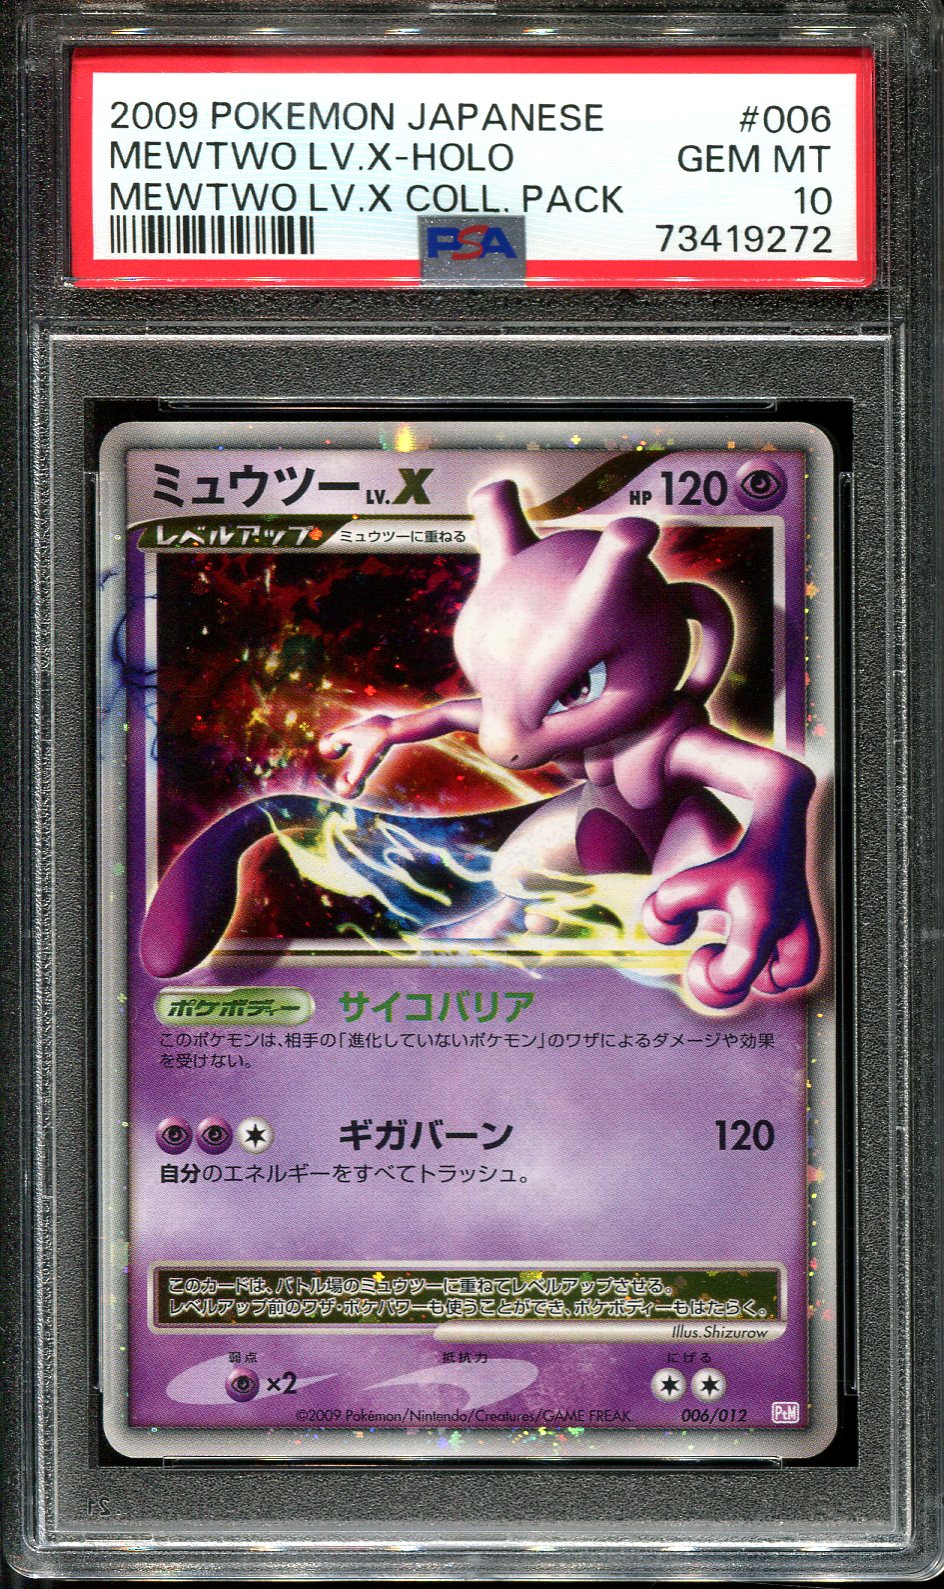 Mewtwo LV.X 006/012 Holo PtM Dpt Collection Pack Japanese Pokemon Card EXC  A449